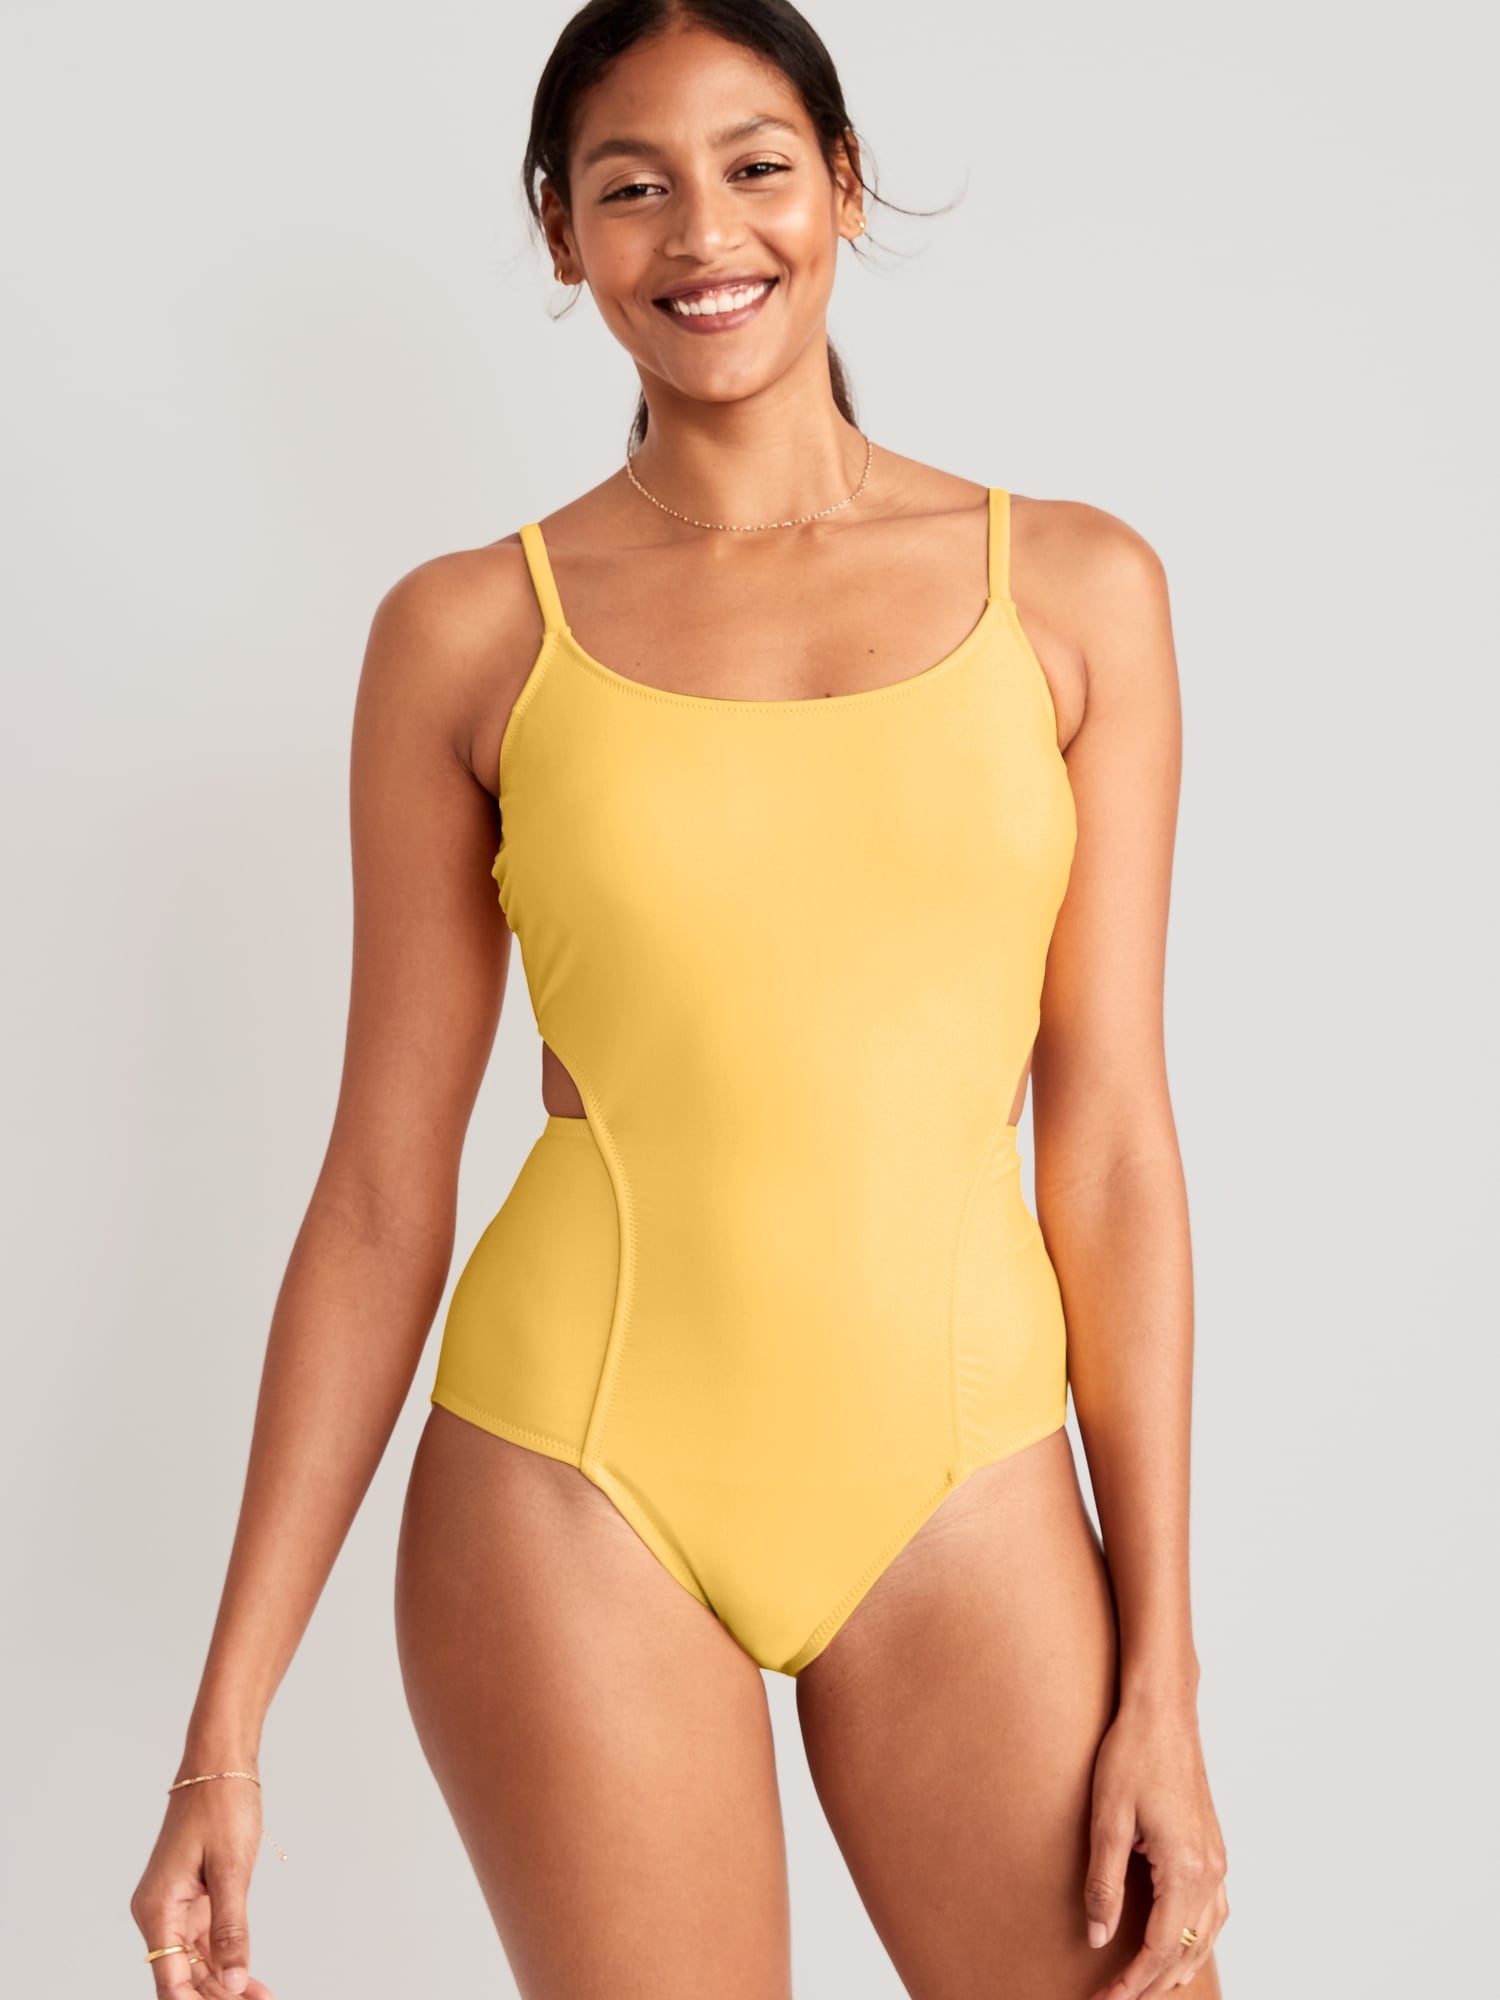 Cutout One-Piece Swimsuit for Women Old Navy